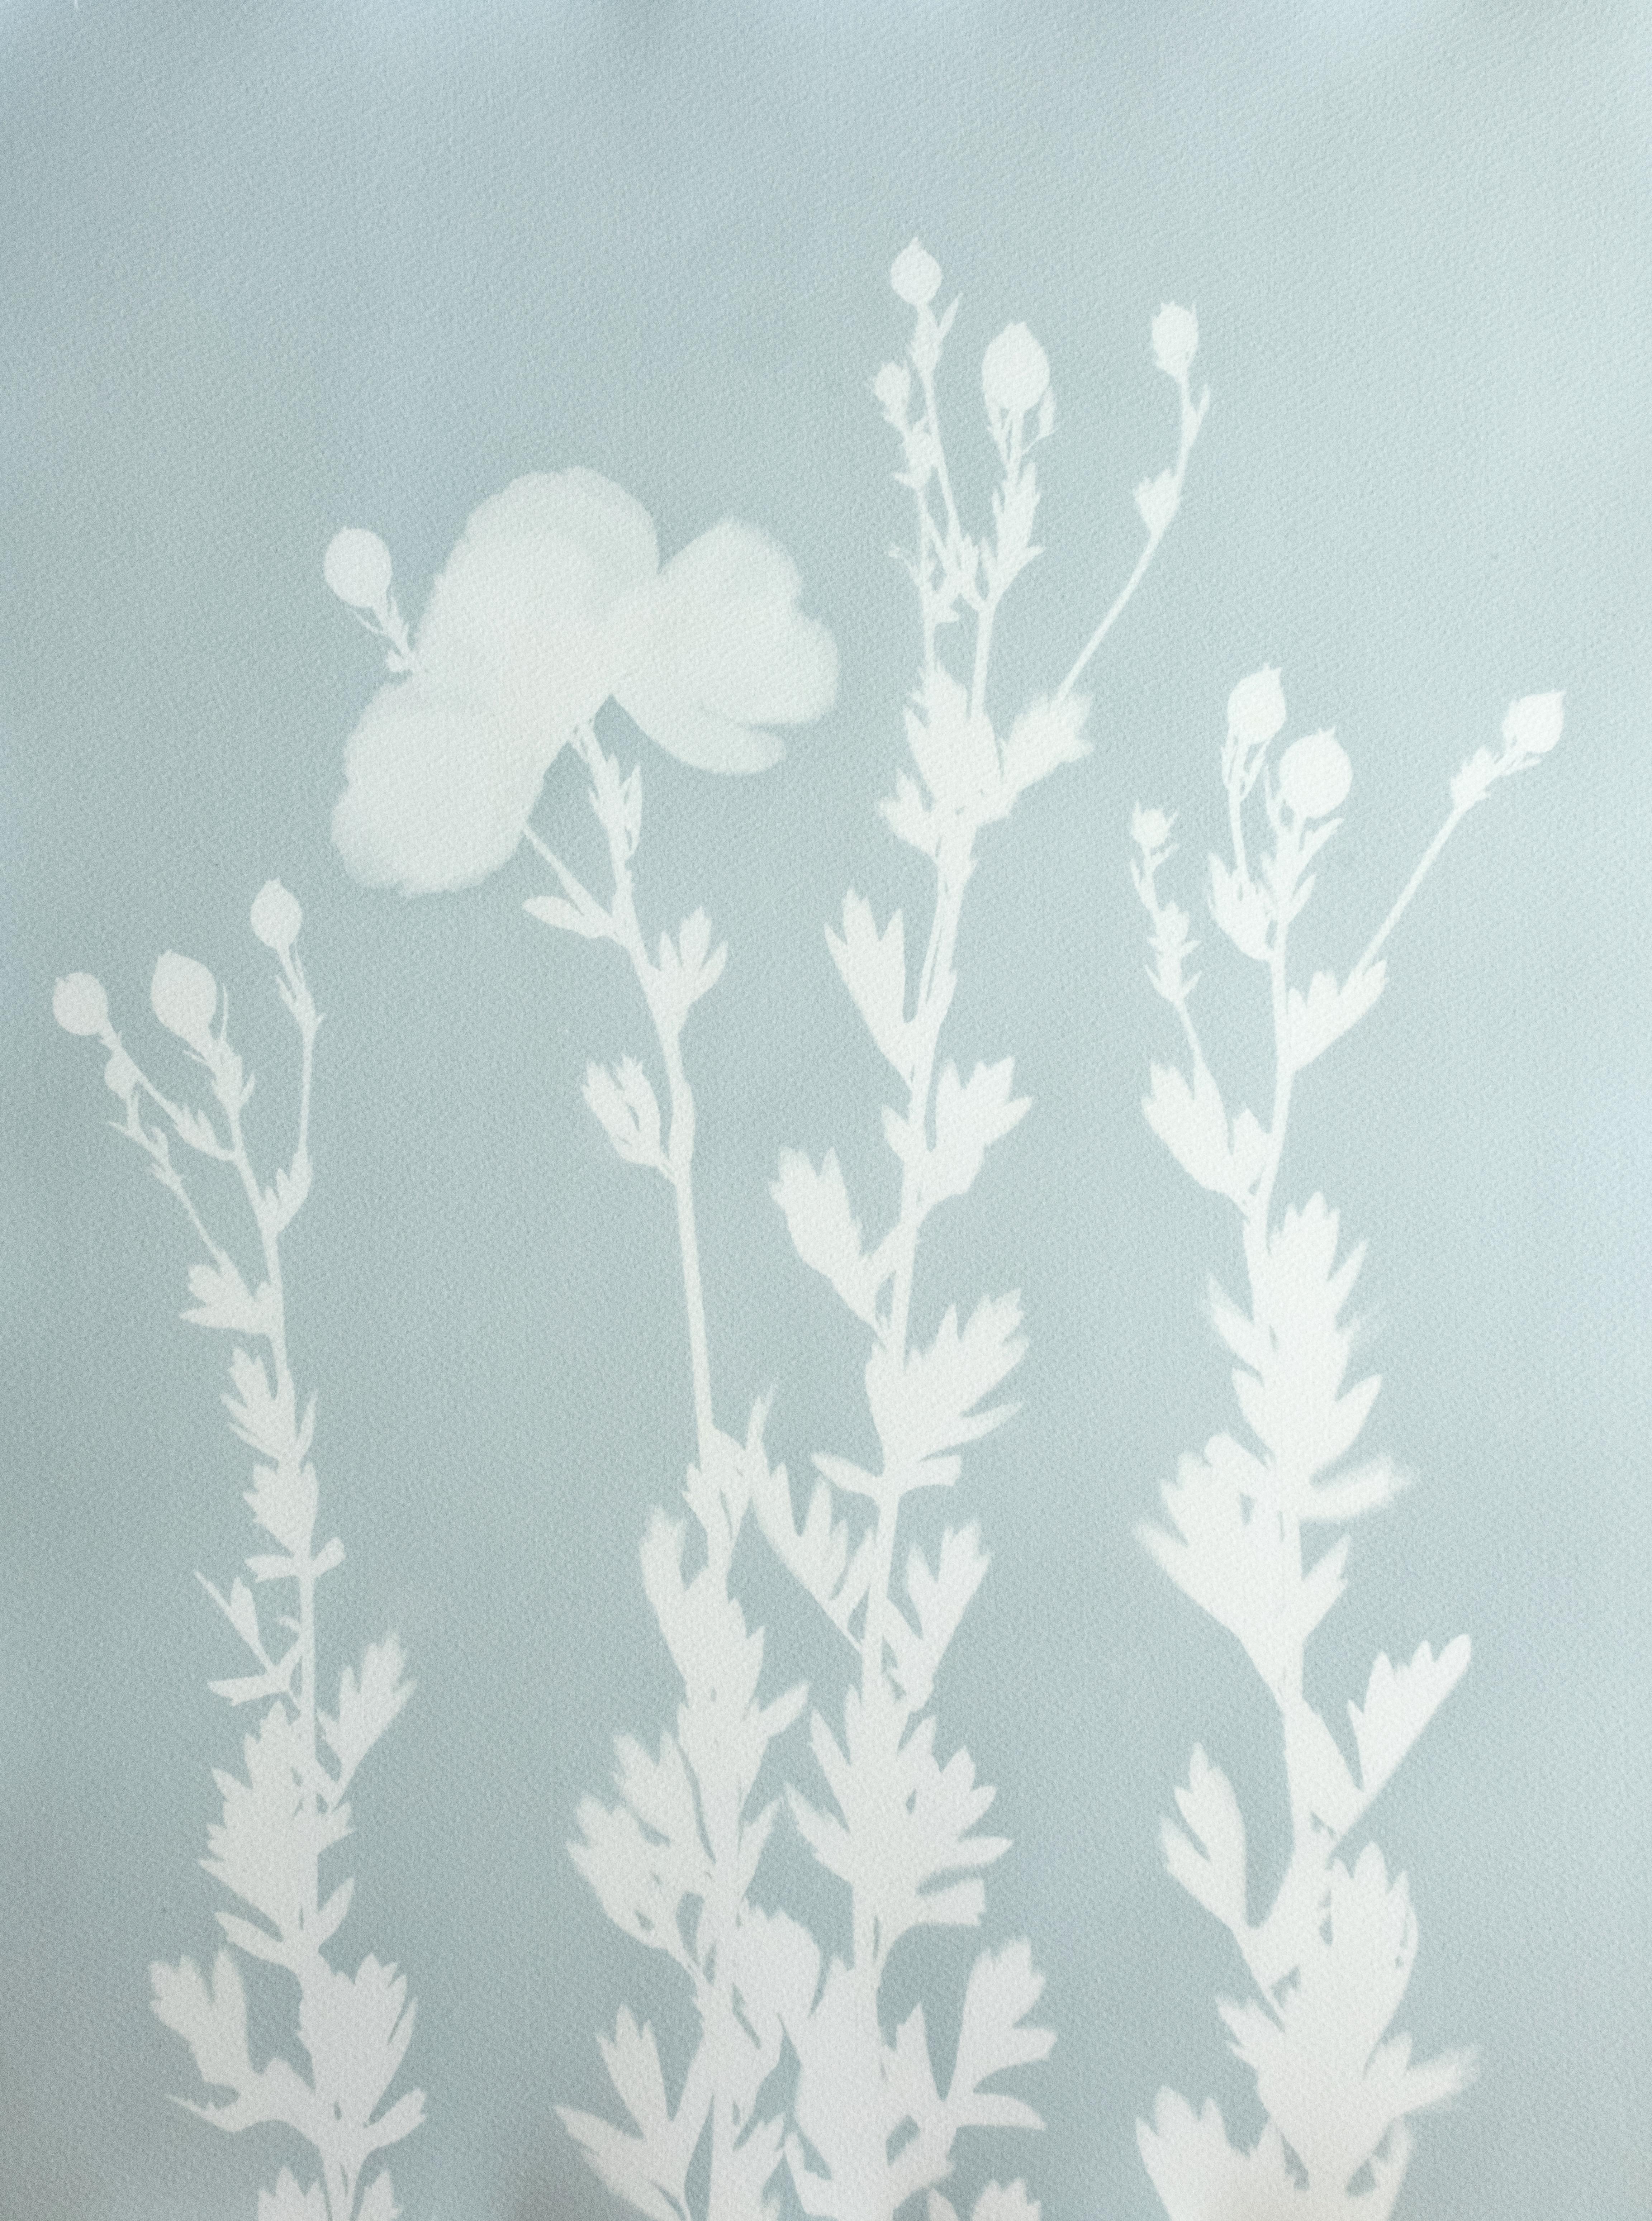 Misty Morning Poppies (hand-printed botanical cyanotype, 24 x 18 inches)